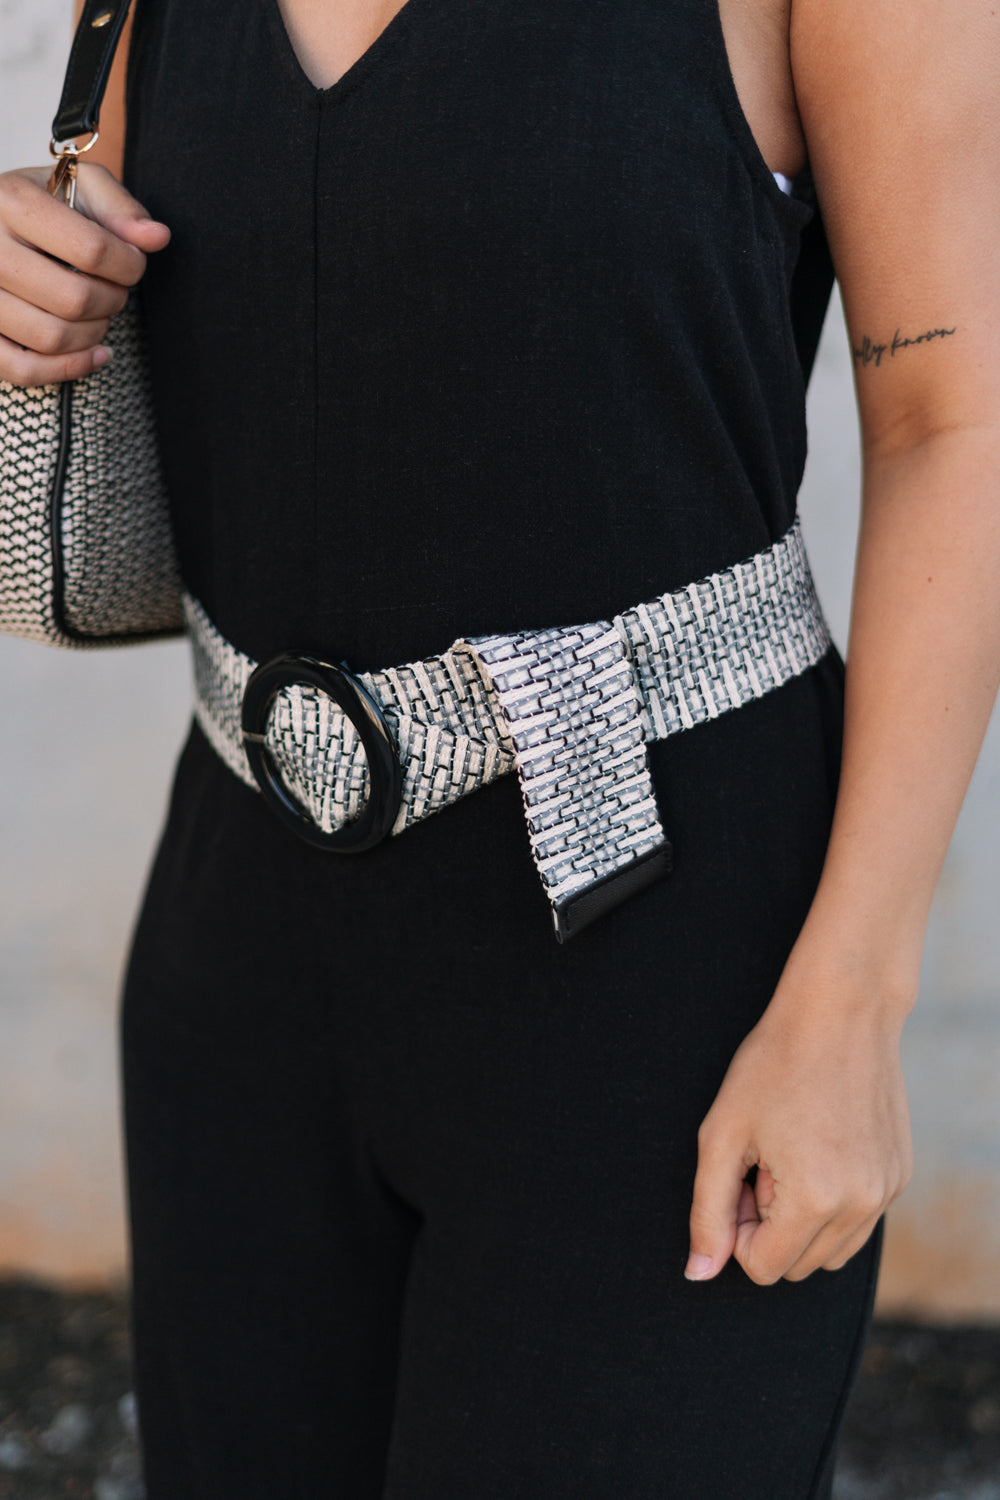 SIde view of female model wearing the Taryn Black & Natural Woven Belt which features Natural Woven Fabric, Black and Grey Wave Thread Design and Black Acrylic Adjustable Buckle